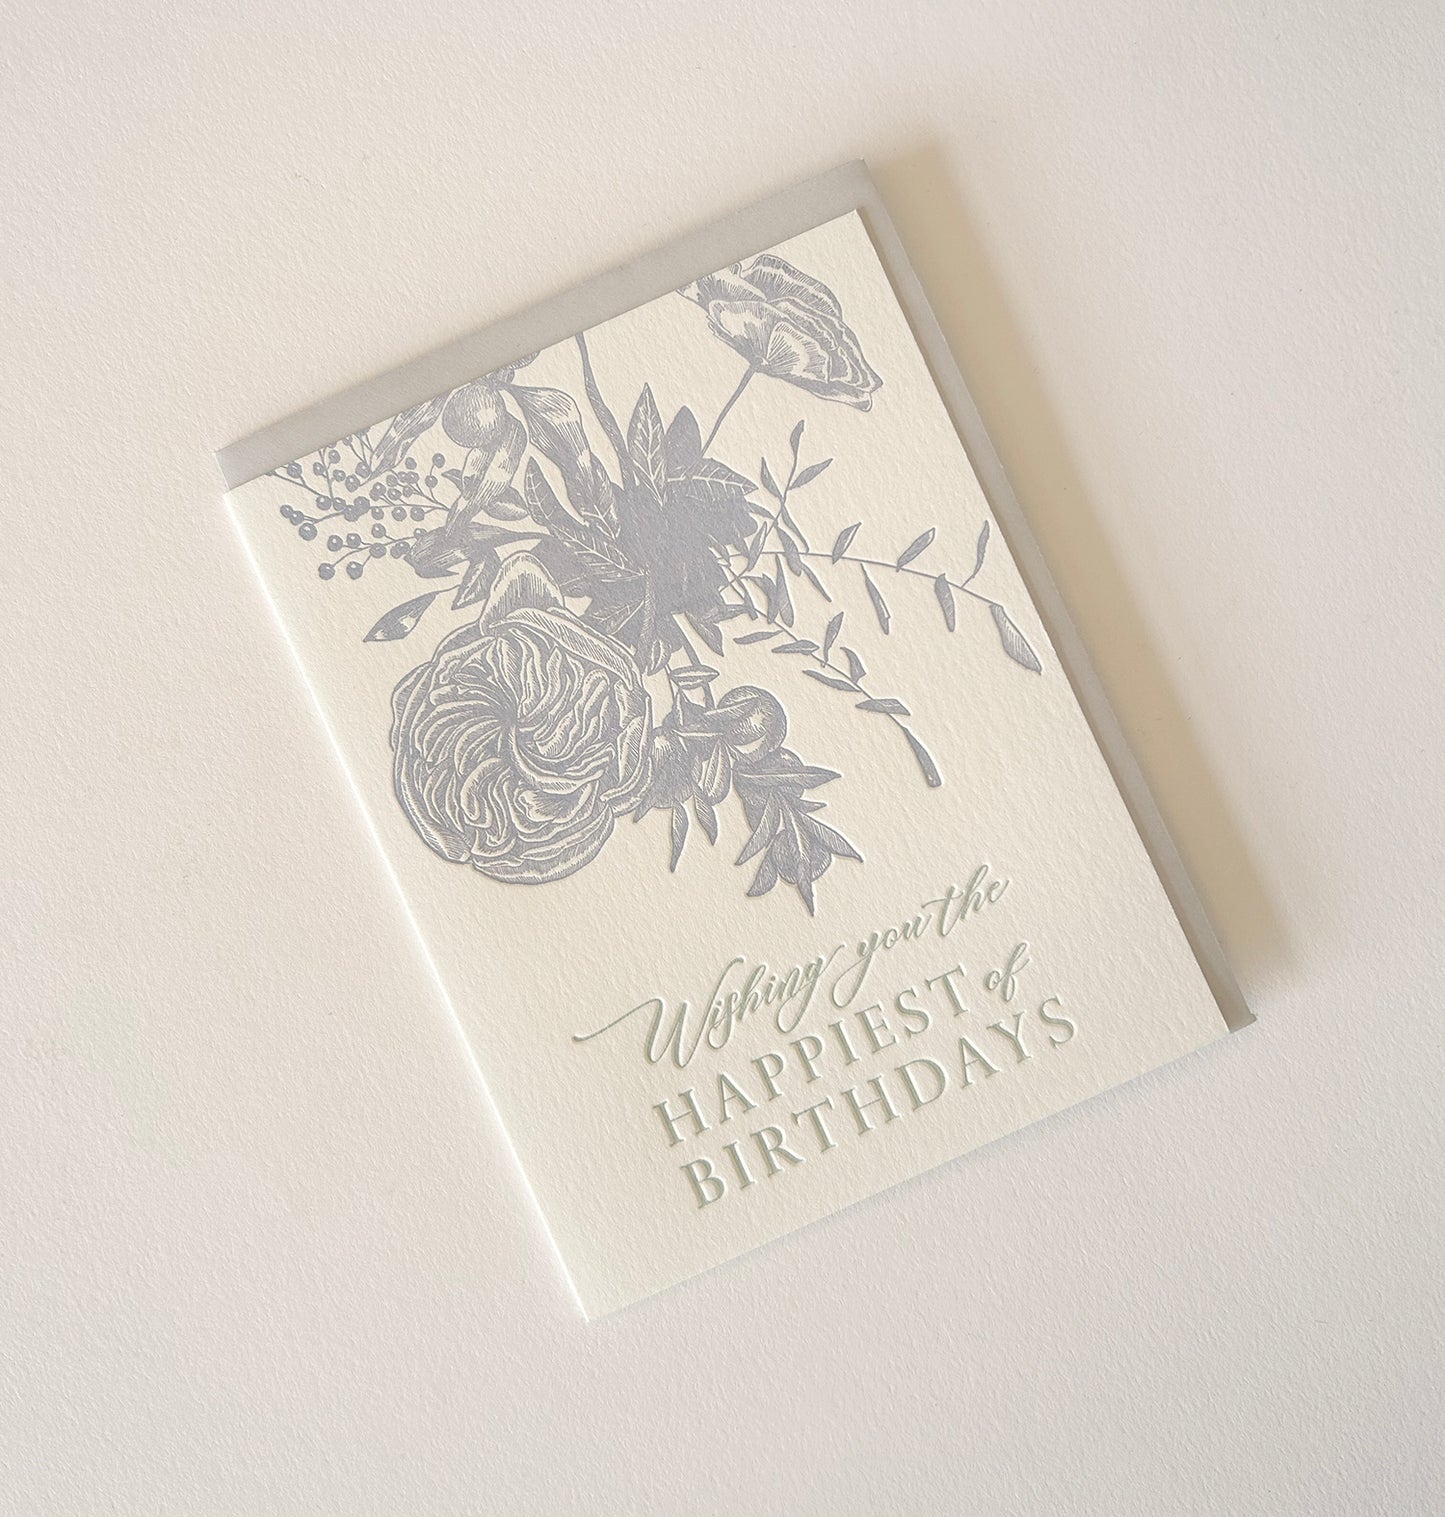 Letterpress birthday card with florals that says "Wishing you the happiest of birthdays" by Rust Belt Love